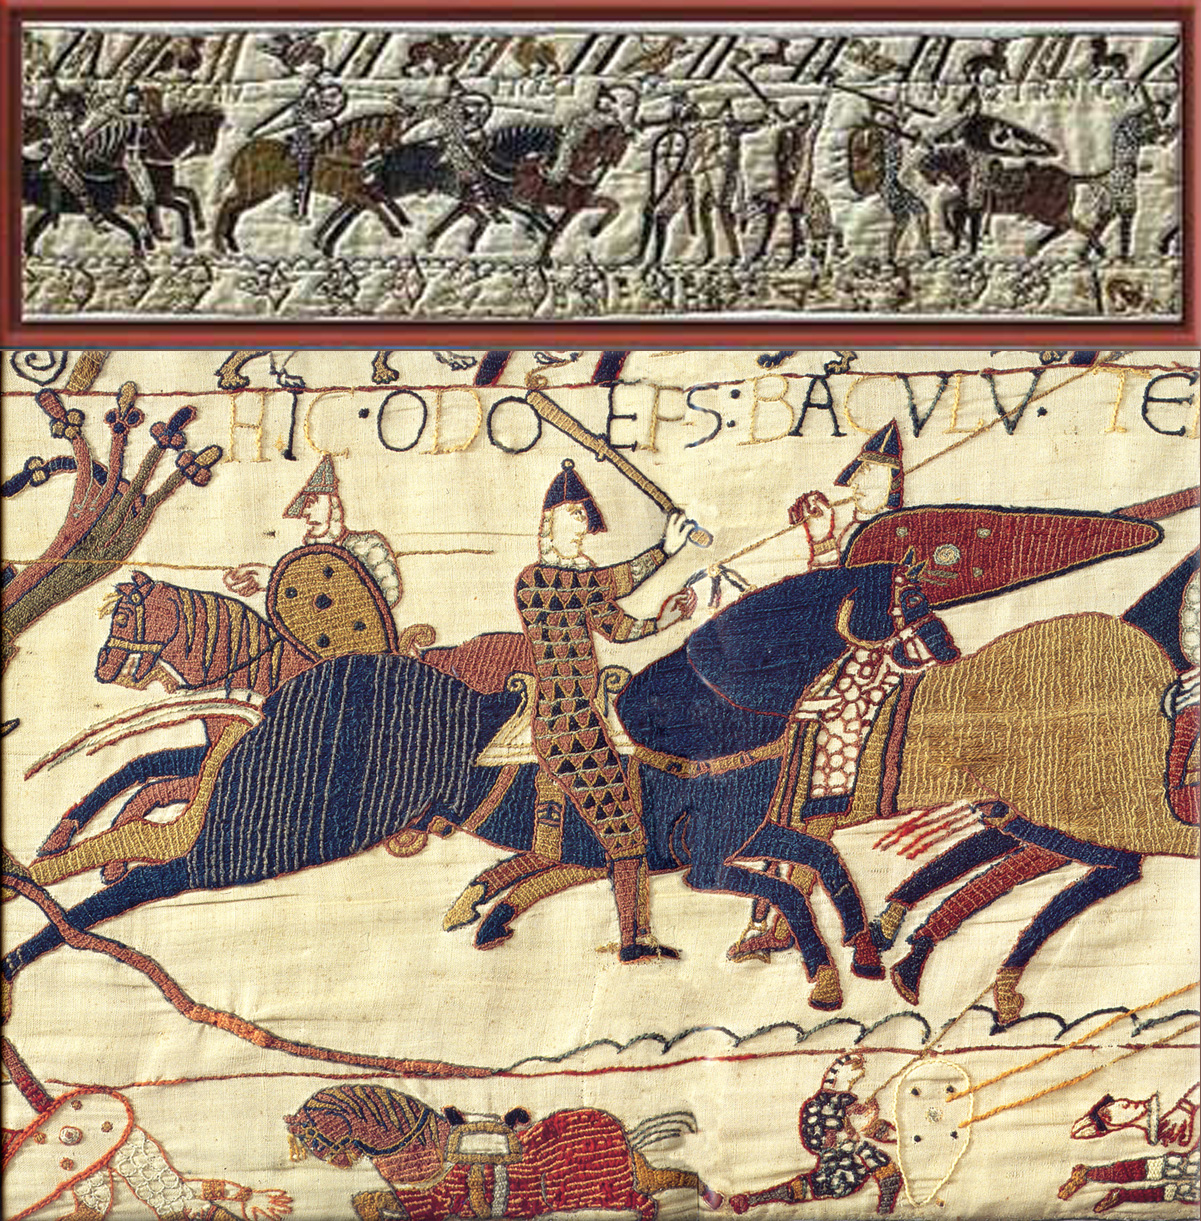 Bayeux Tapestry embroidered cloth depicting the Battle of Hastings and the events leading up to the Norman Conquest of England